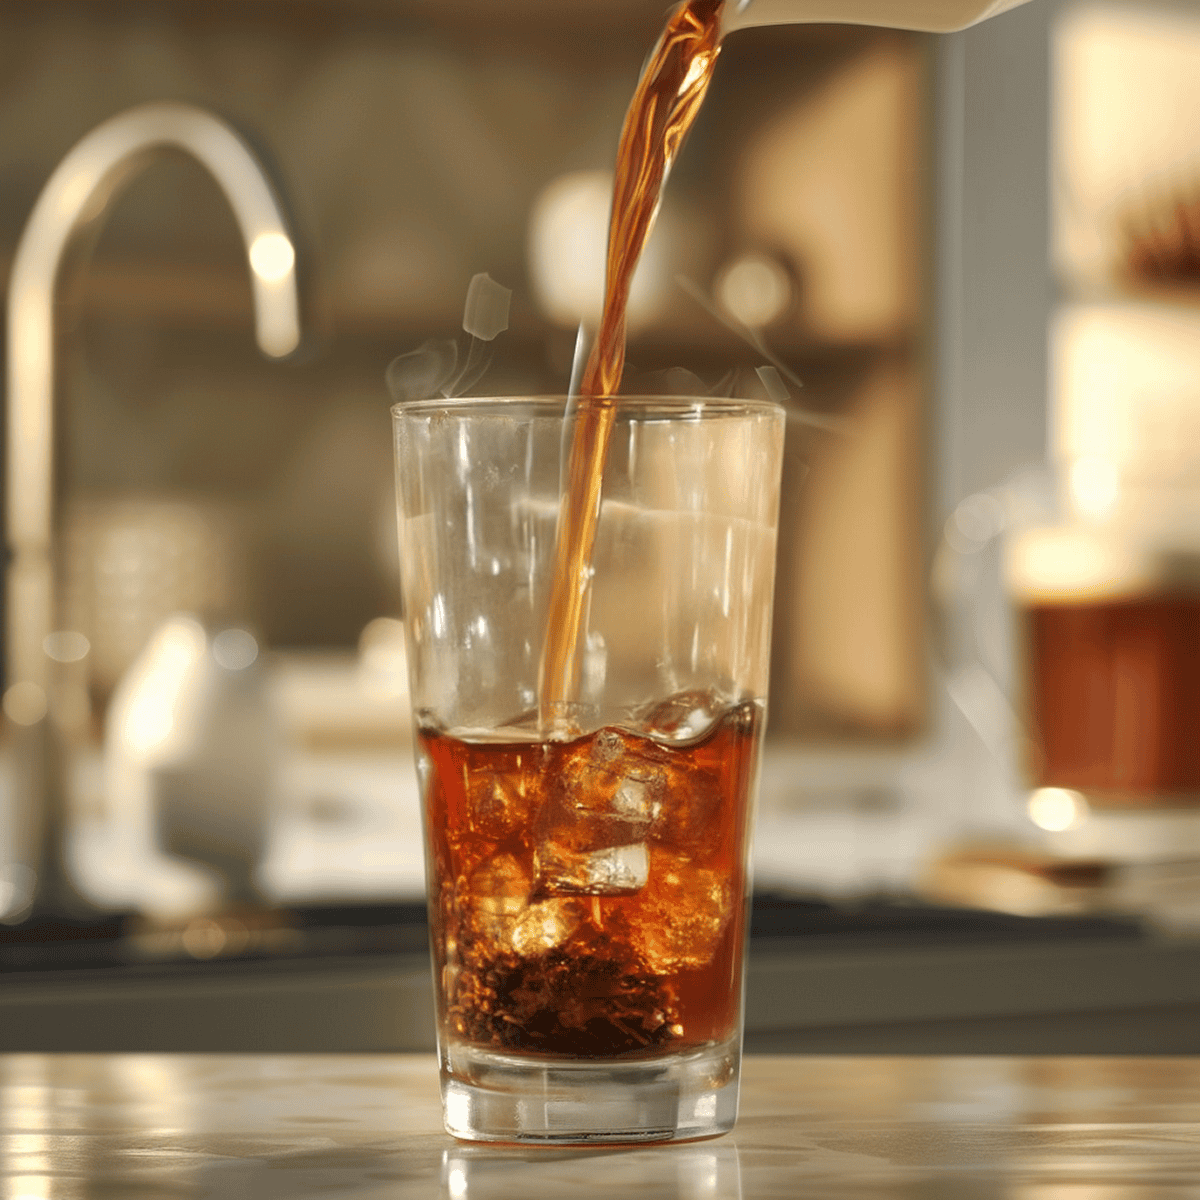 Pouring brewed tea into a glass of ice.